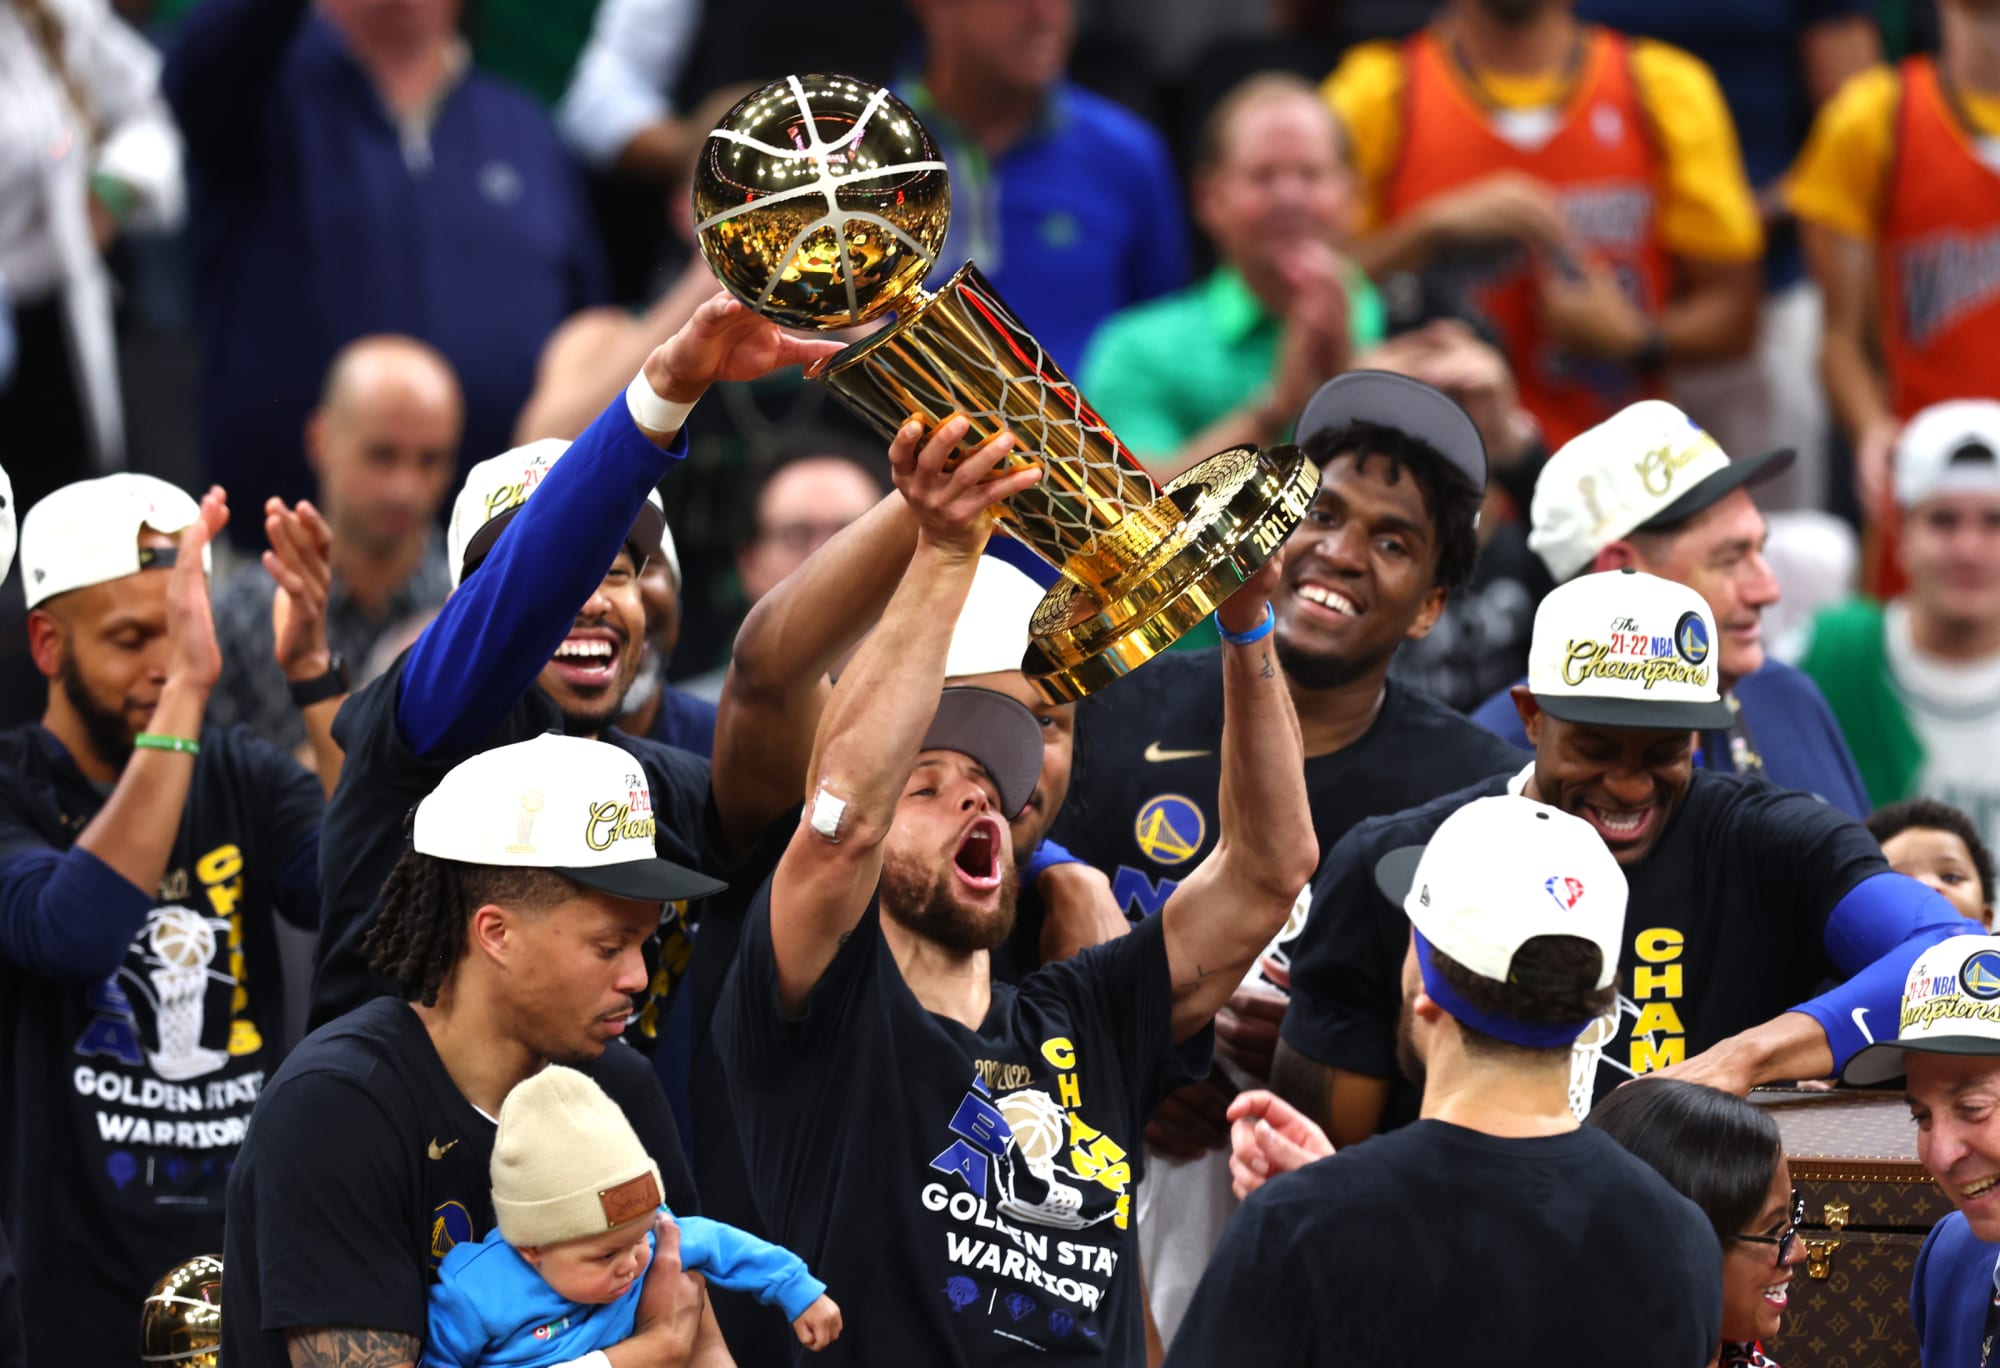 Chase Heart erupting as Warriors win NBA Finals will give any individual goosebumps [Video]